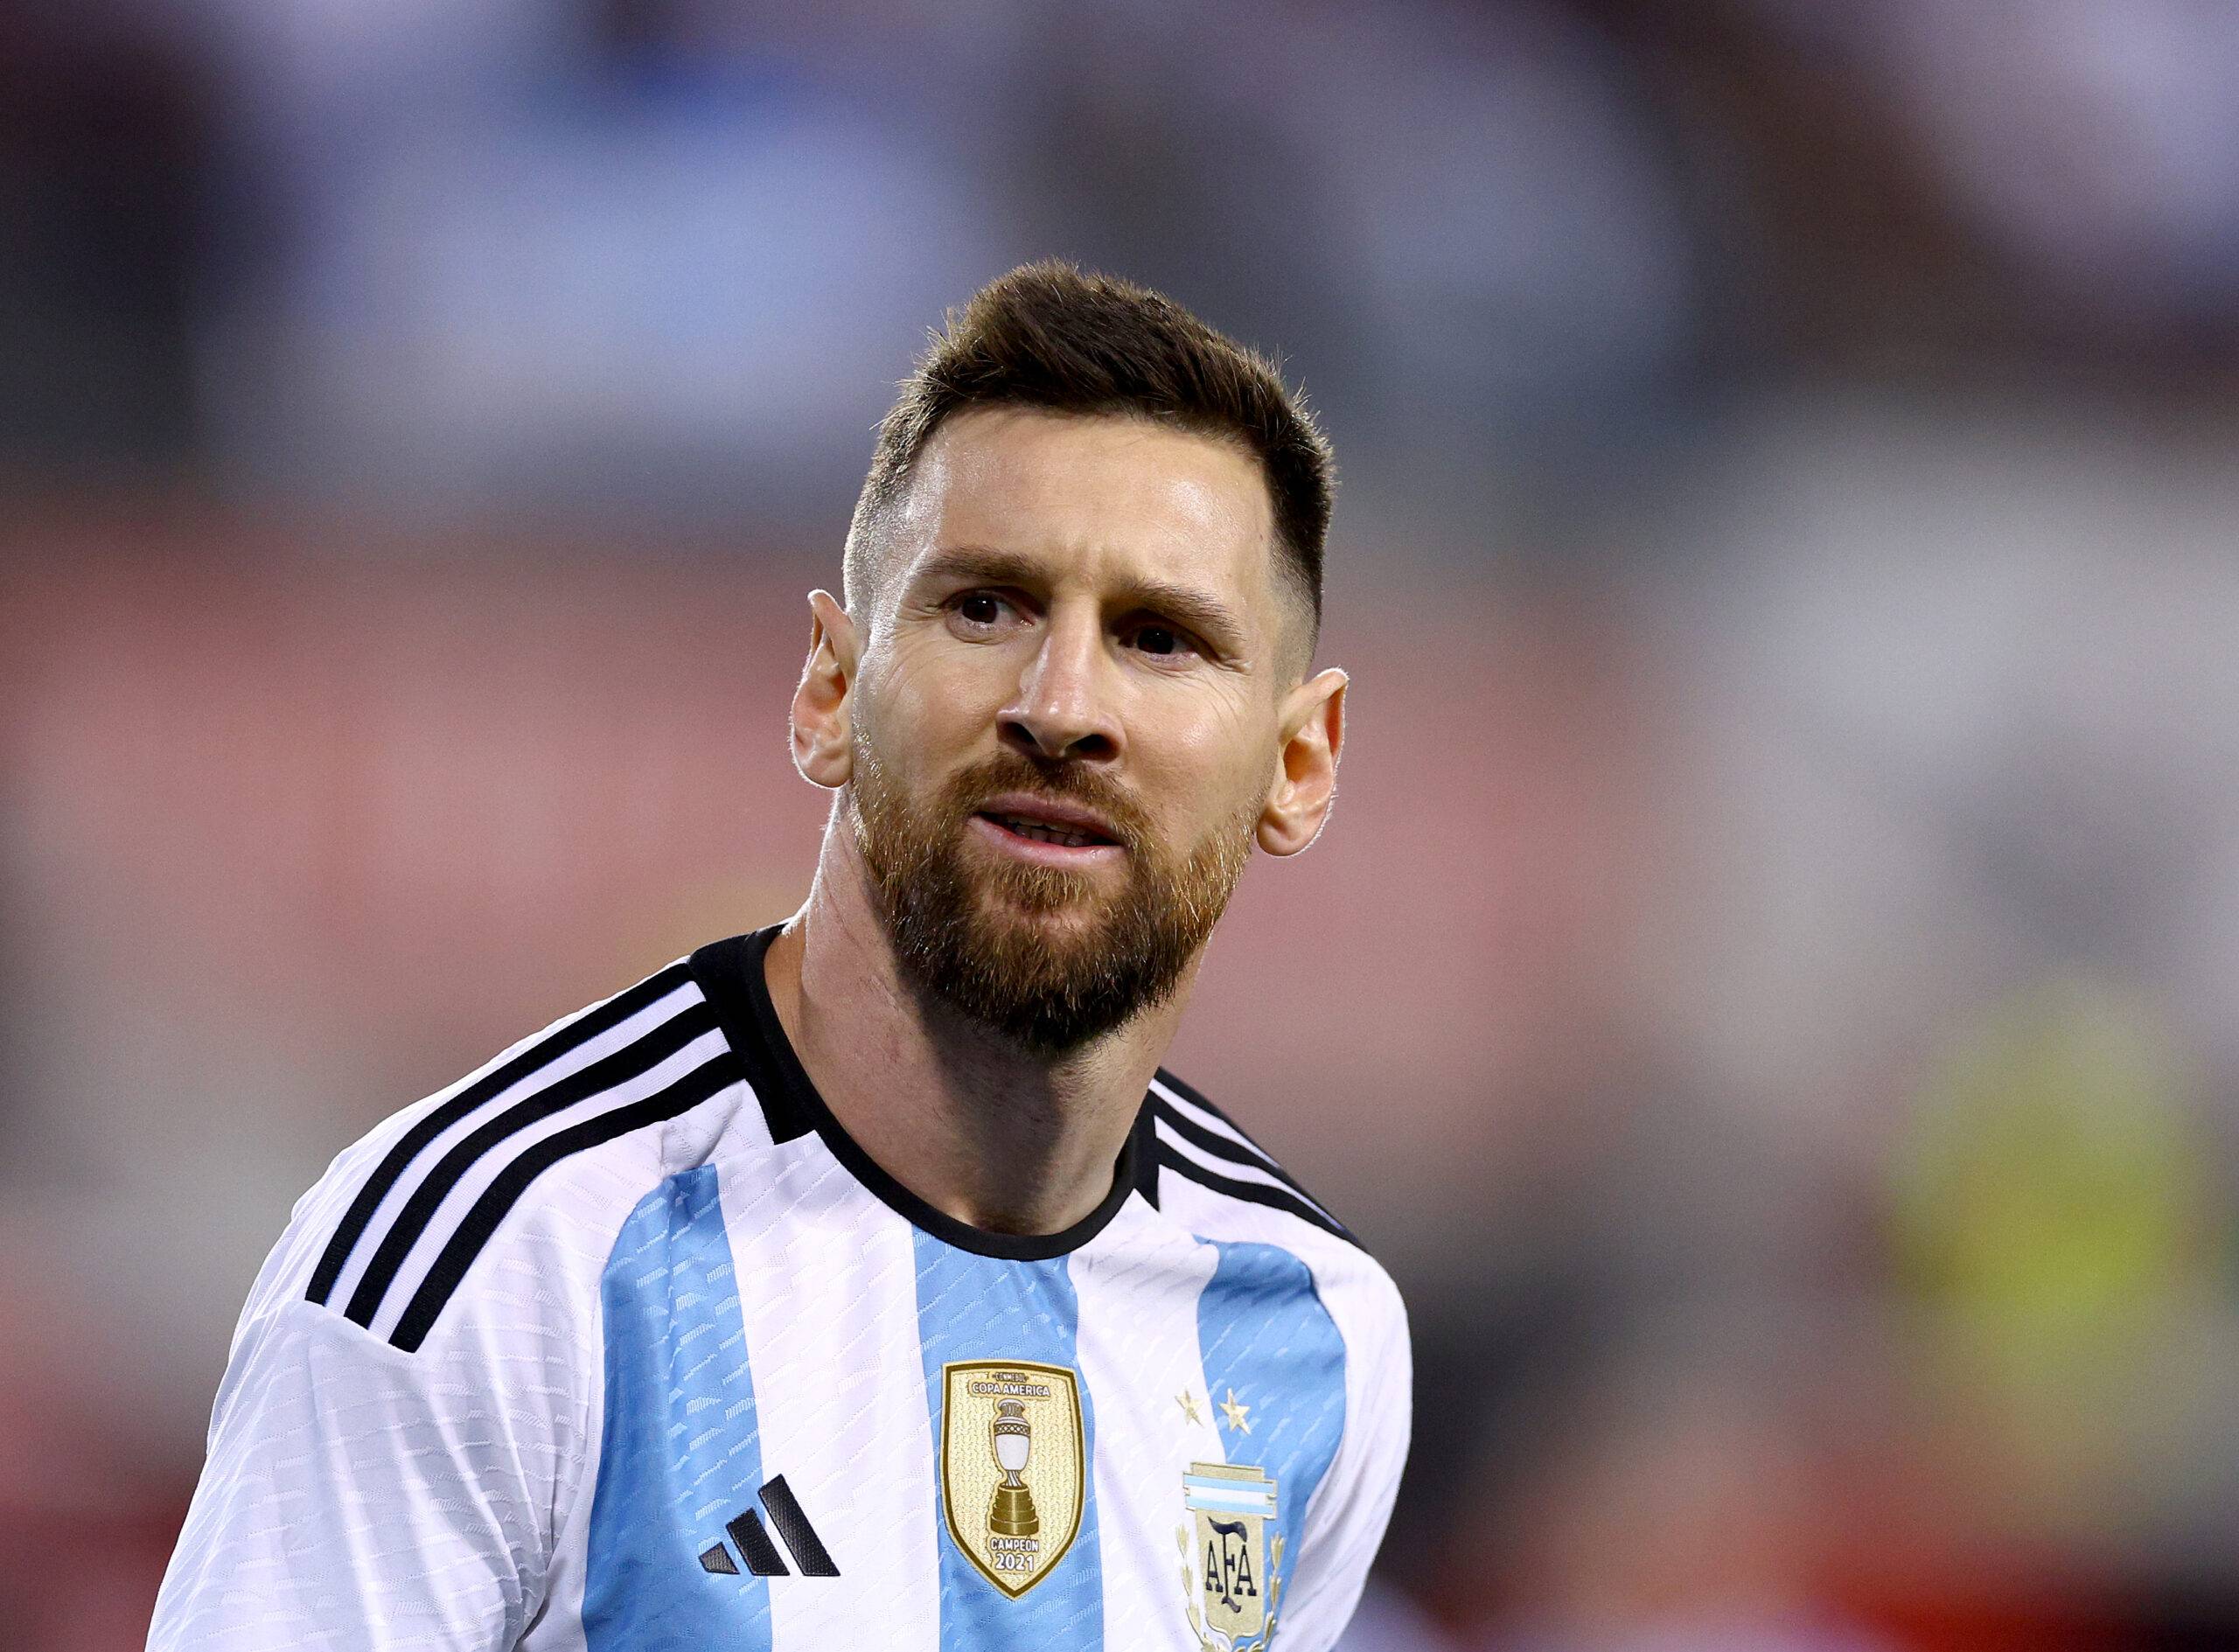 Messi confused during match v Jamaica